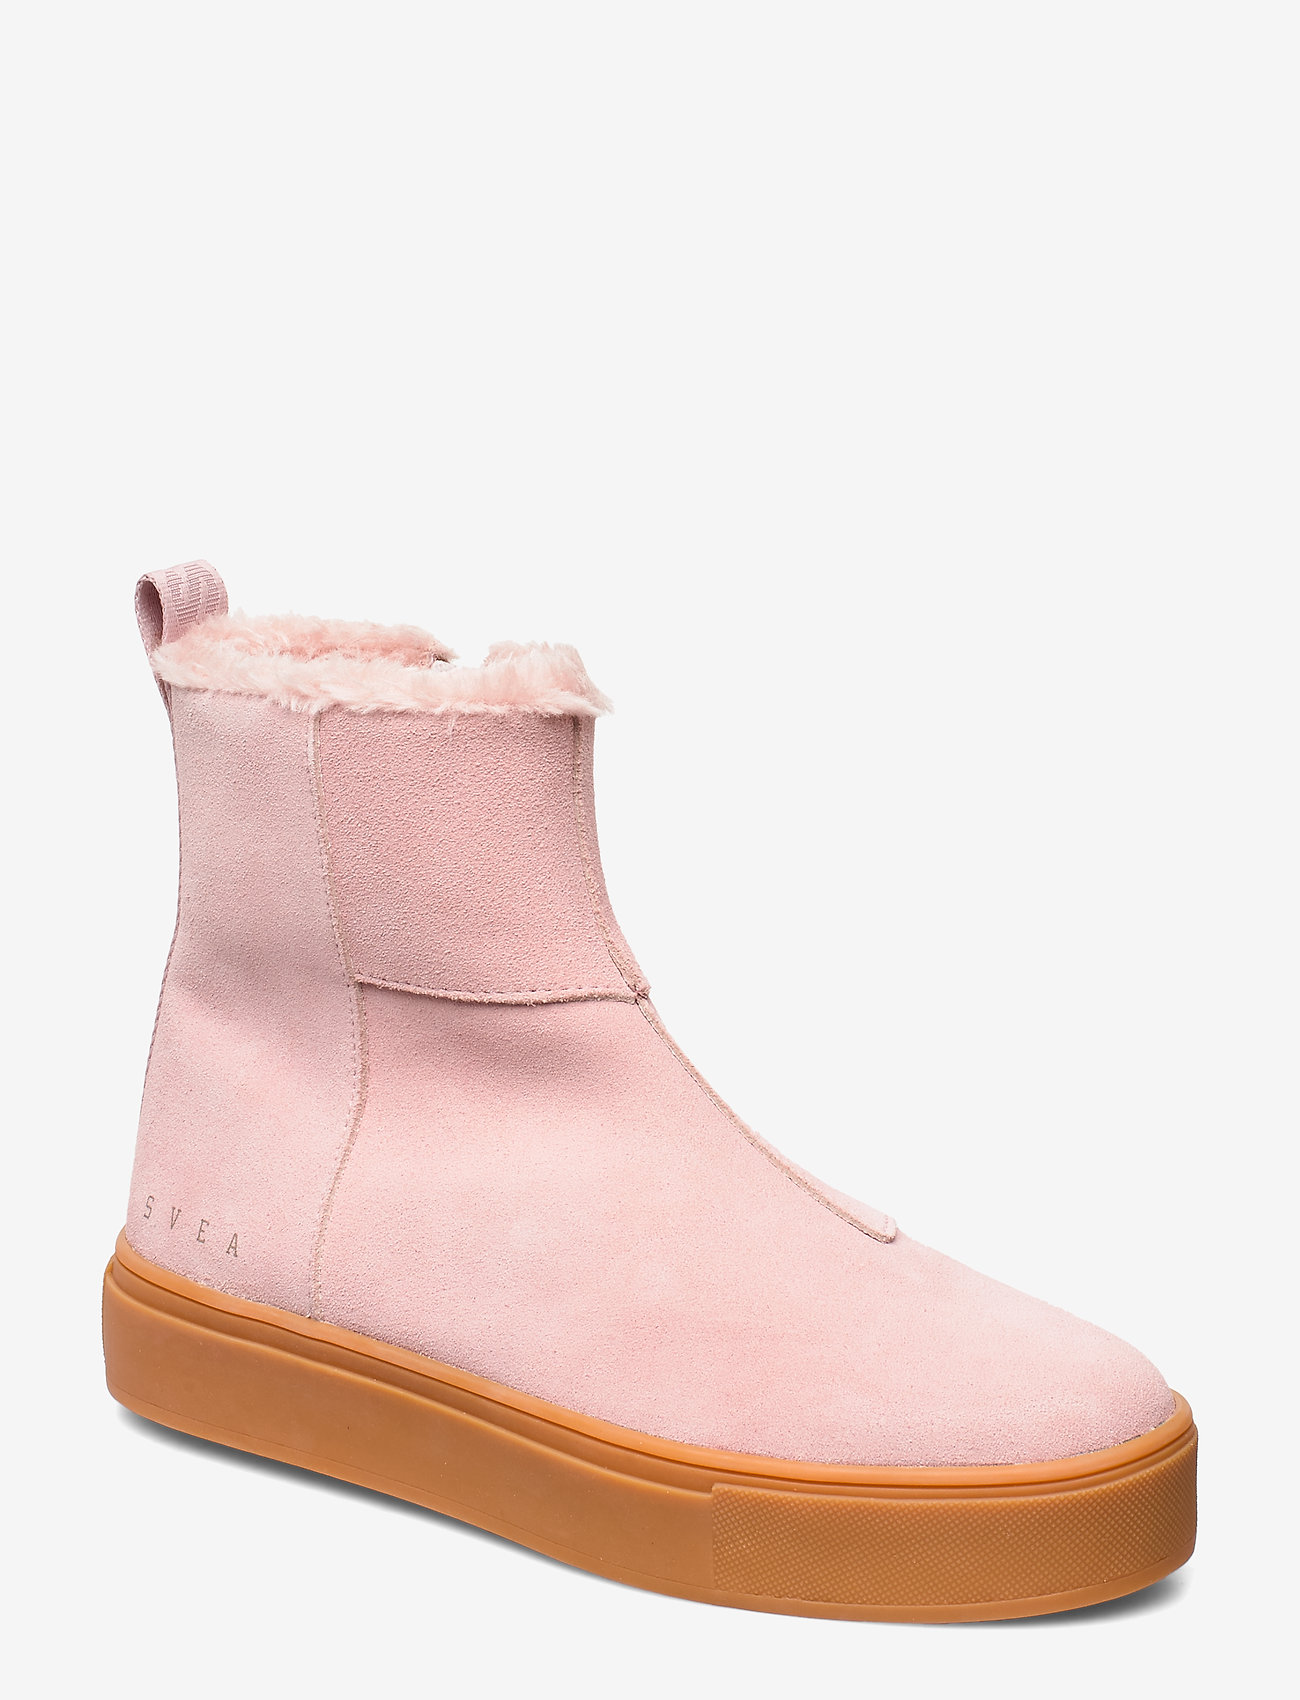 Svea - Suede / Pile Boots - flat ankle boots - soft pink - 0